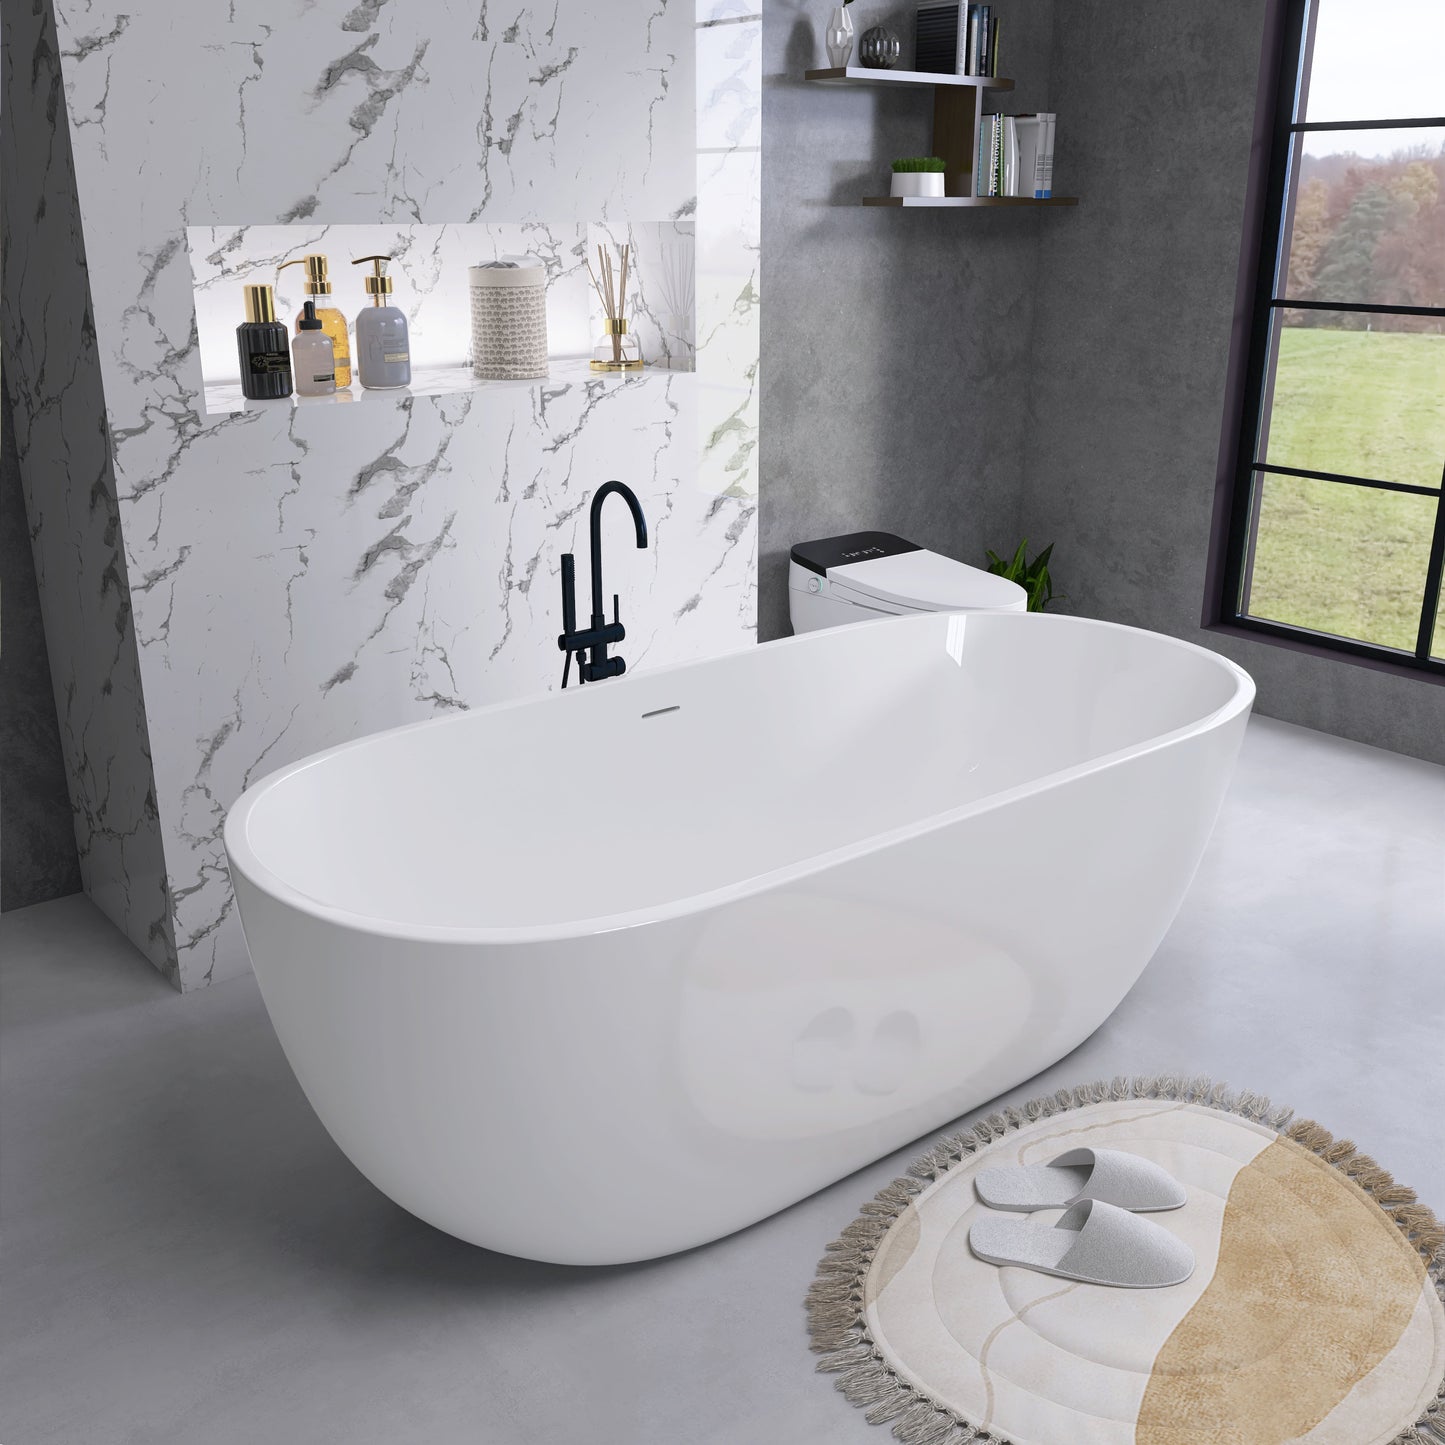 65" Acrylic Free Standing Tub - Classic Oval Shape Soaking Tub, Adjustable Freestanding Bathtub with Integrated Slotted Overflow and Chrome Pop-up Drain Anti-clogging Gloss White